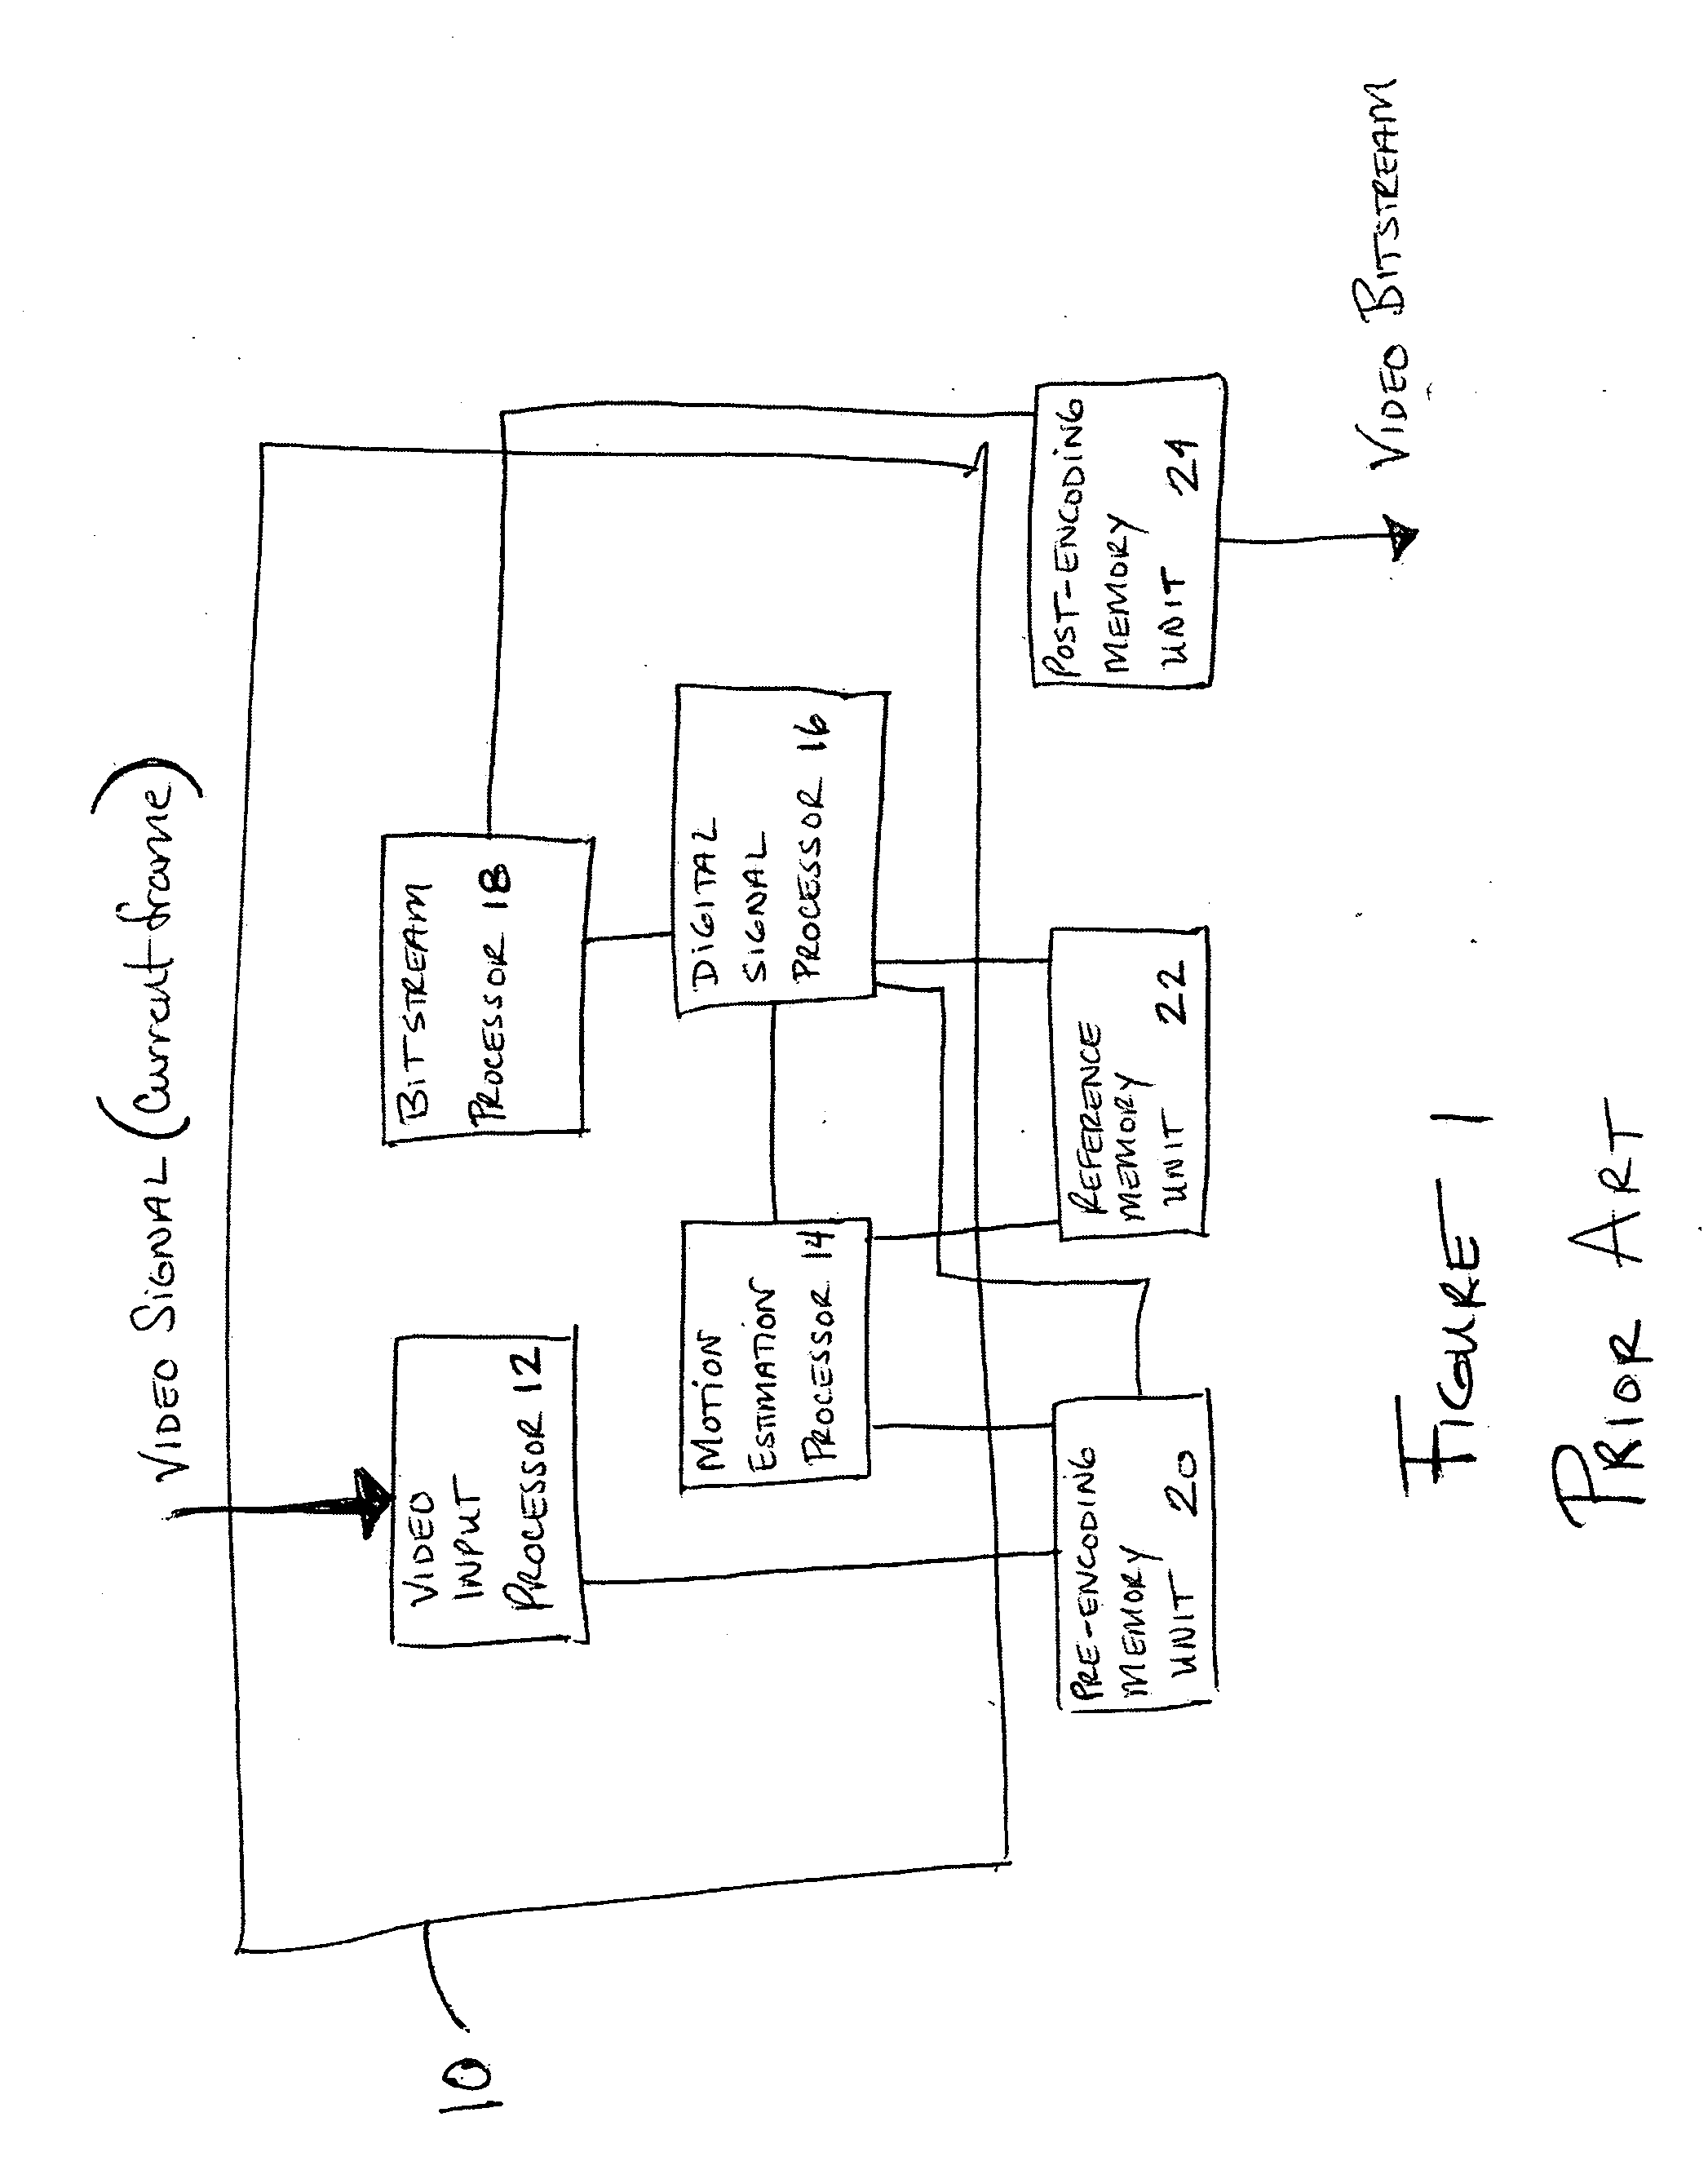 Video encoder and method for detecting and encoding noise